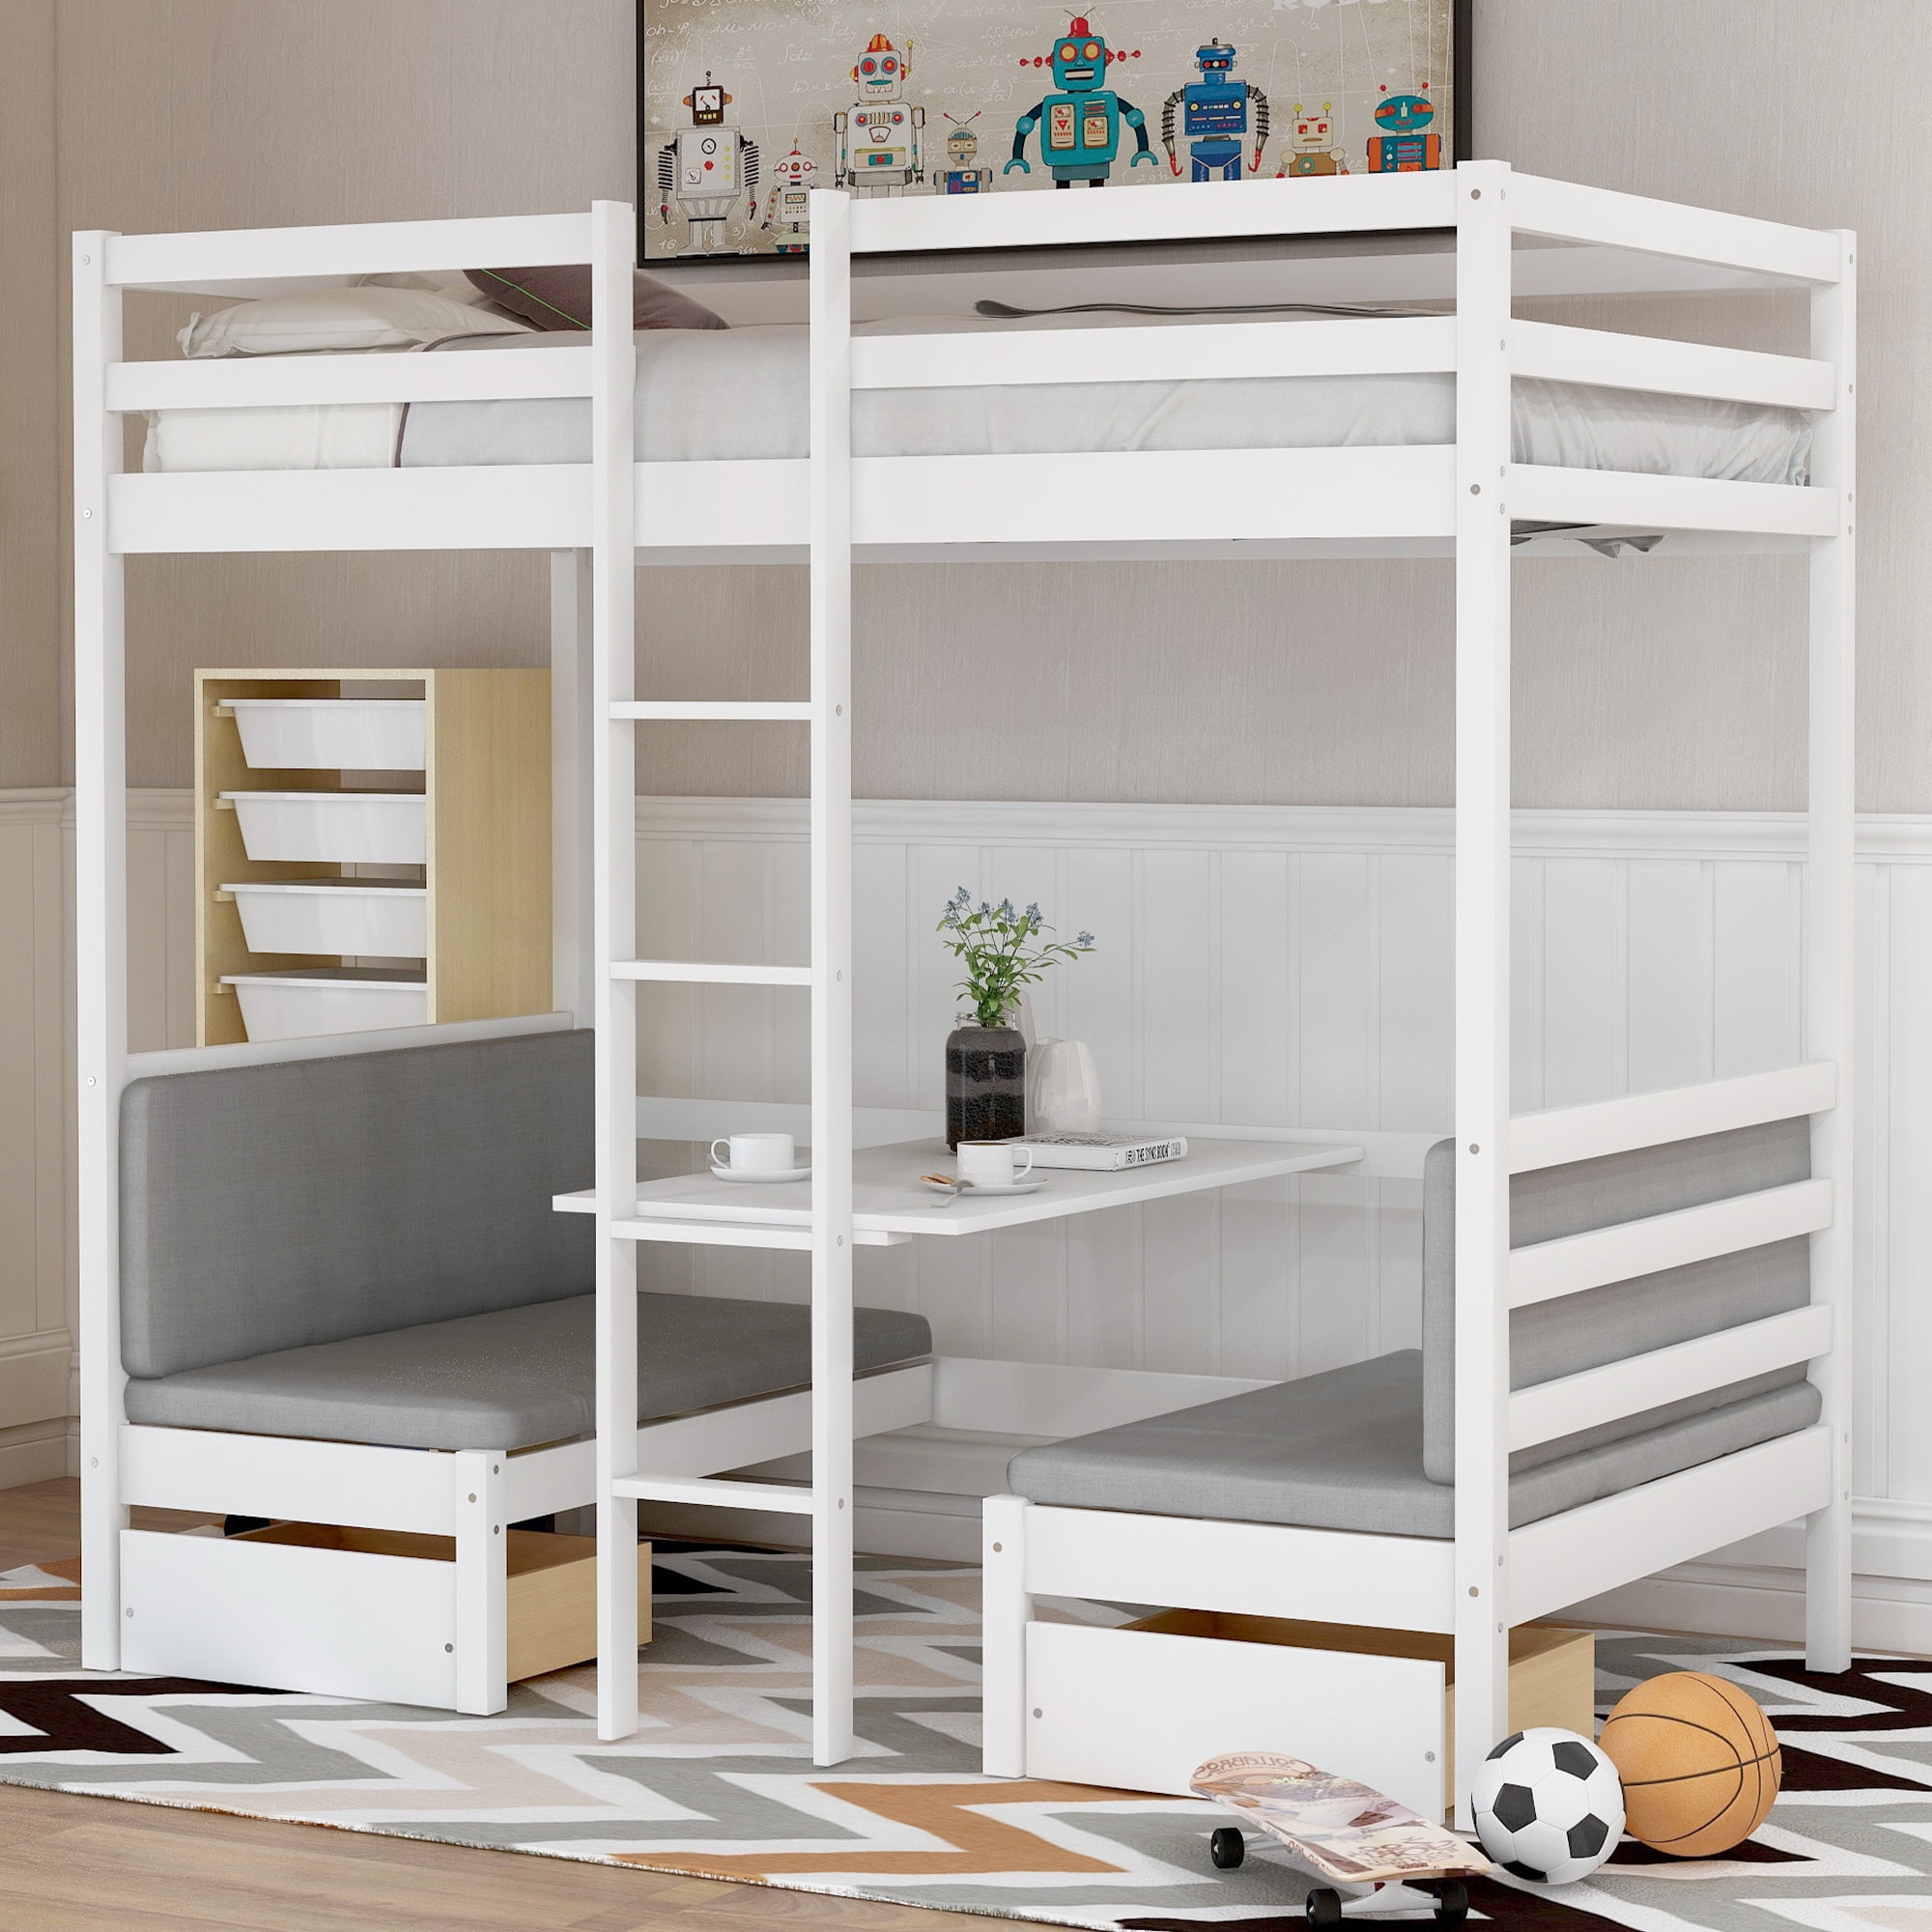 Euroco Solid Wood Convertible Twin Bunk, Solid Wood Kids Bunk Beds